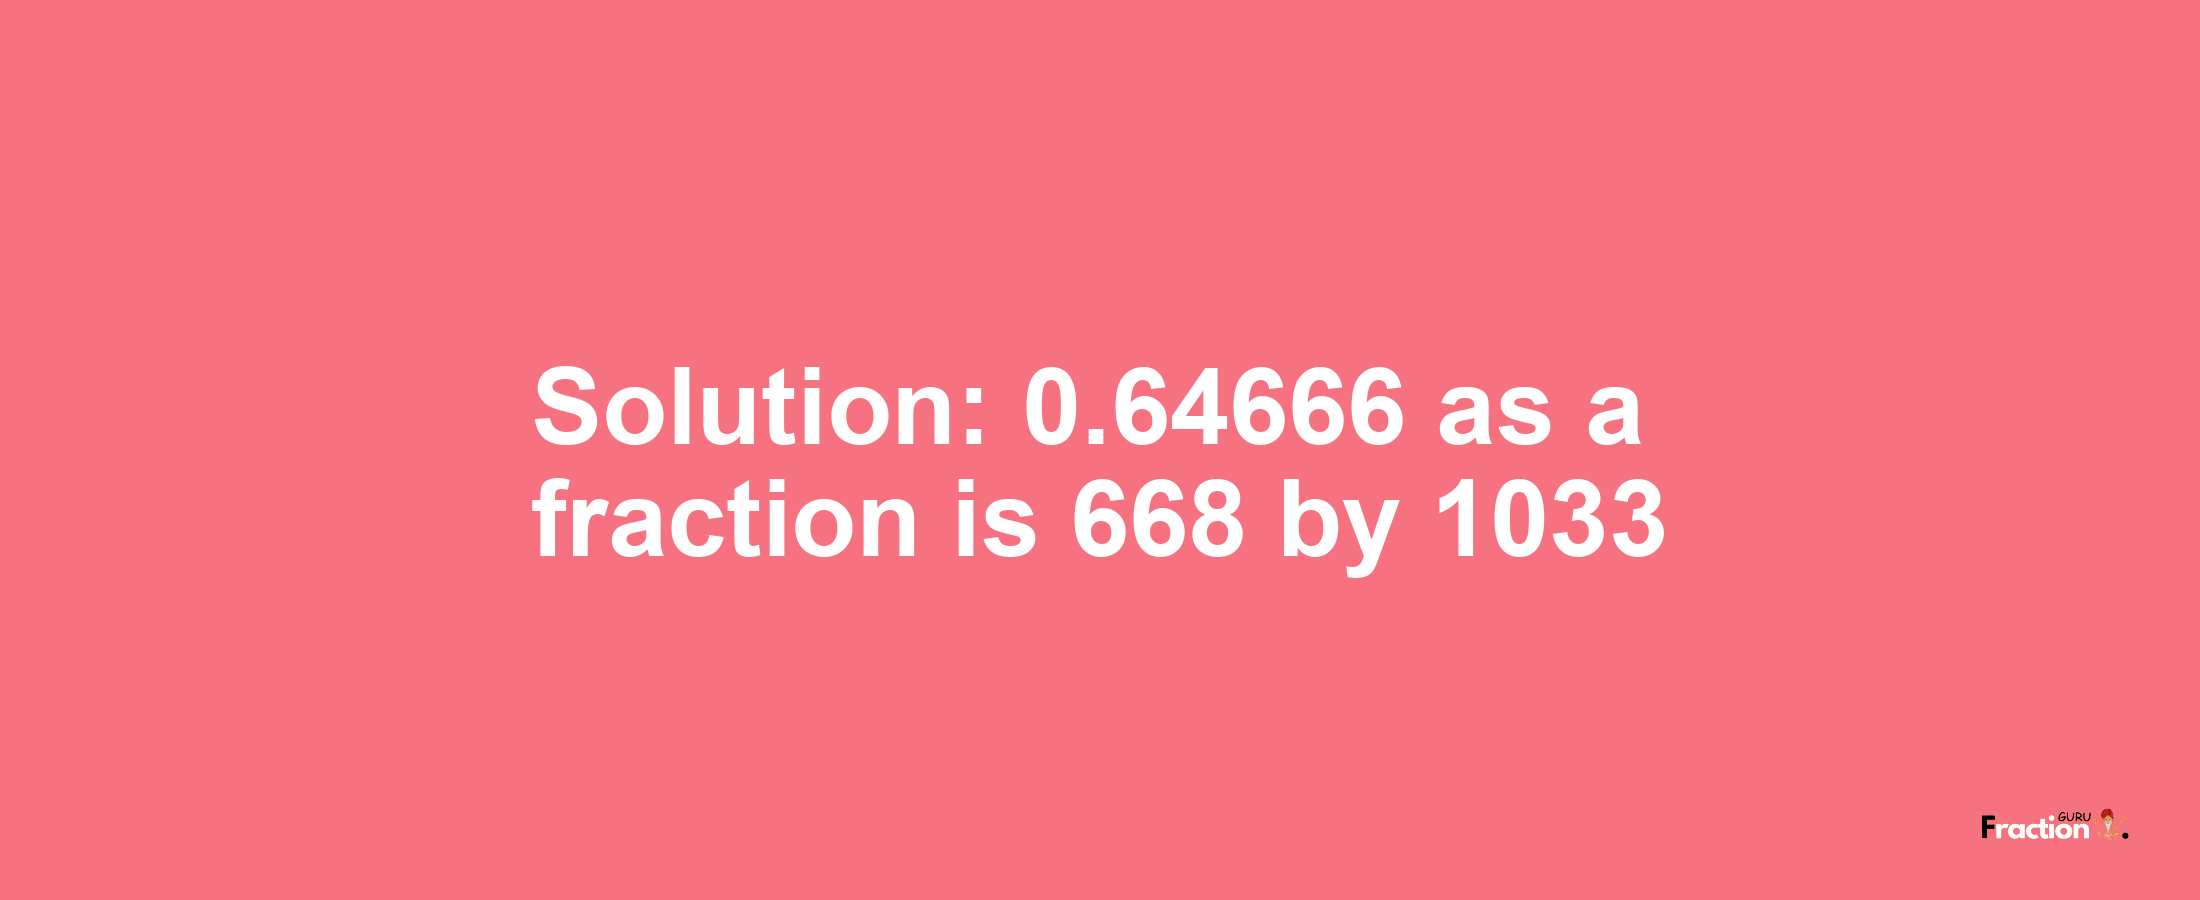 Solution:0.64666 as a fraction is 668/1033